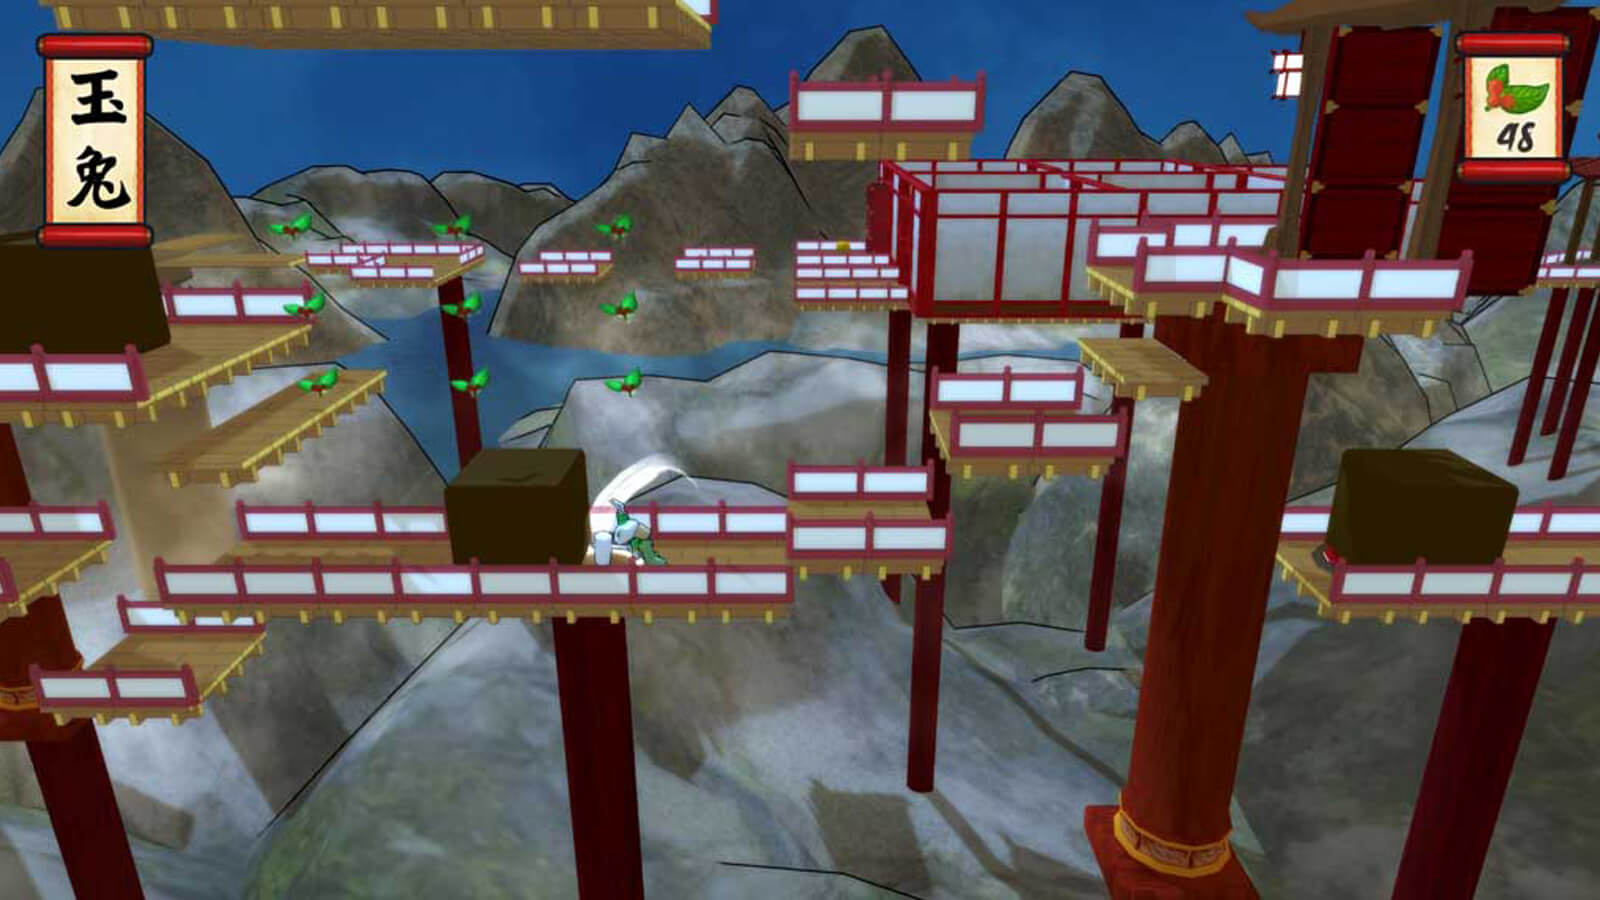 The moon rabbit swings at a block that is in its way on one of many paths between floating platforms